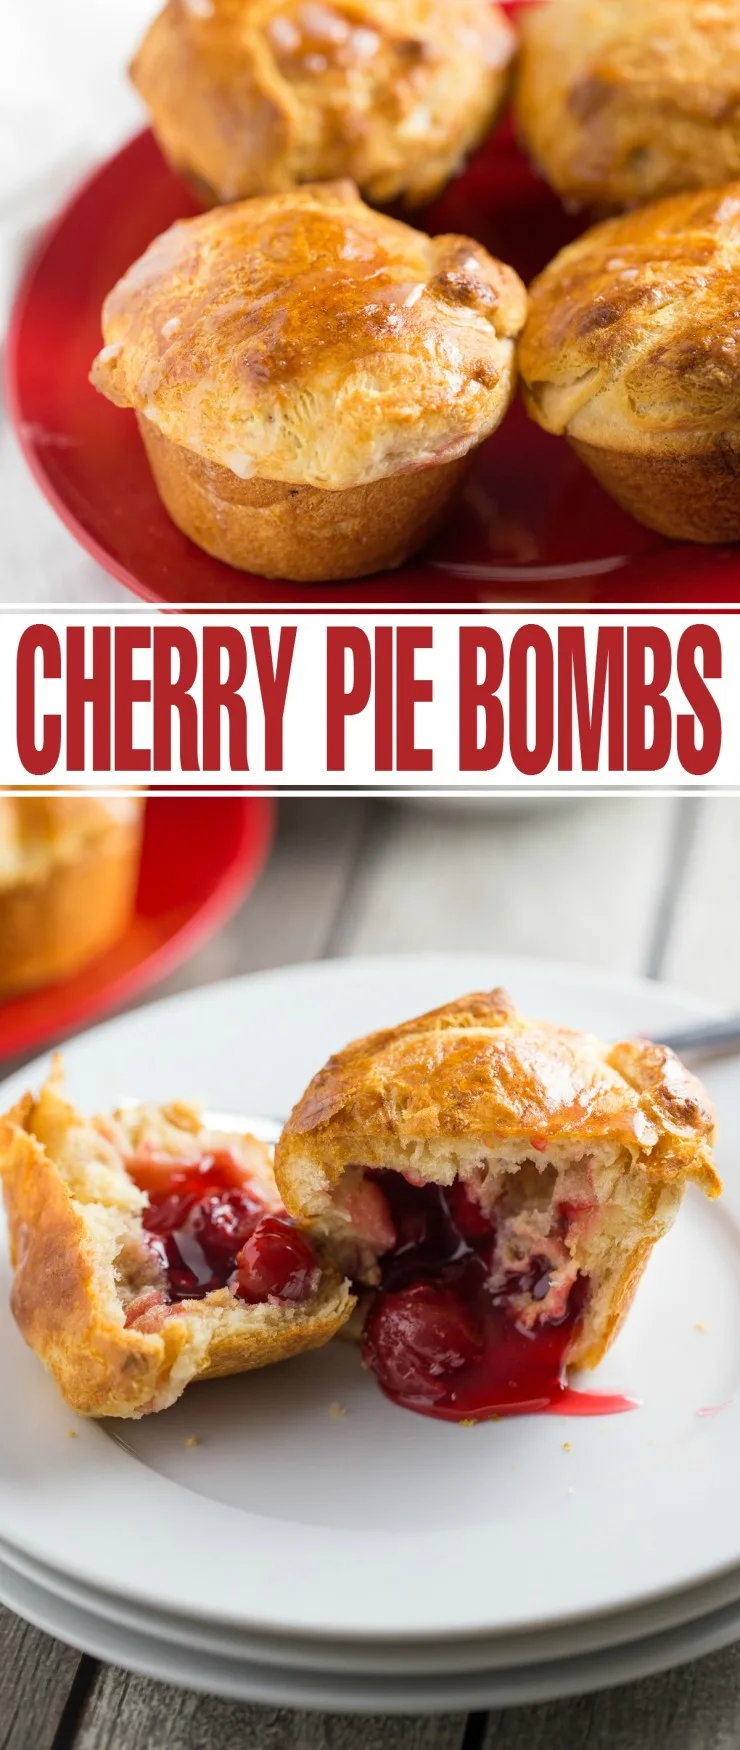 These Cherry Pie Bombs are full of Cherry Pie flavour in a miniature package! Super easy to make, these are a great dessert to serve at dinner parties.